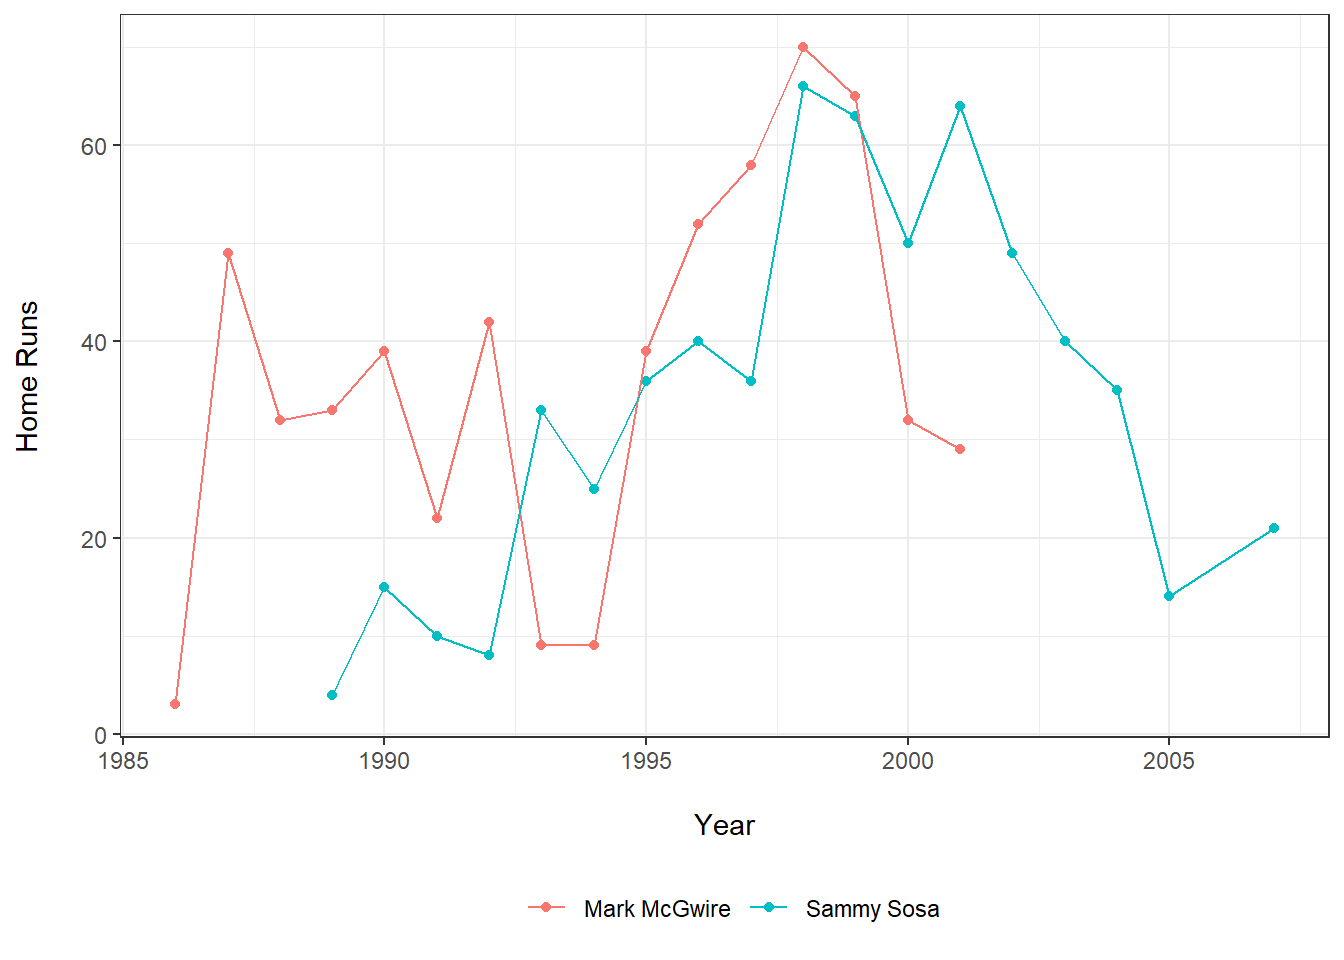 A line graph comparing the number of home runs by Mark McGwire versus Sammy Sosa during their MLB careers.